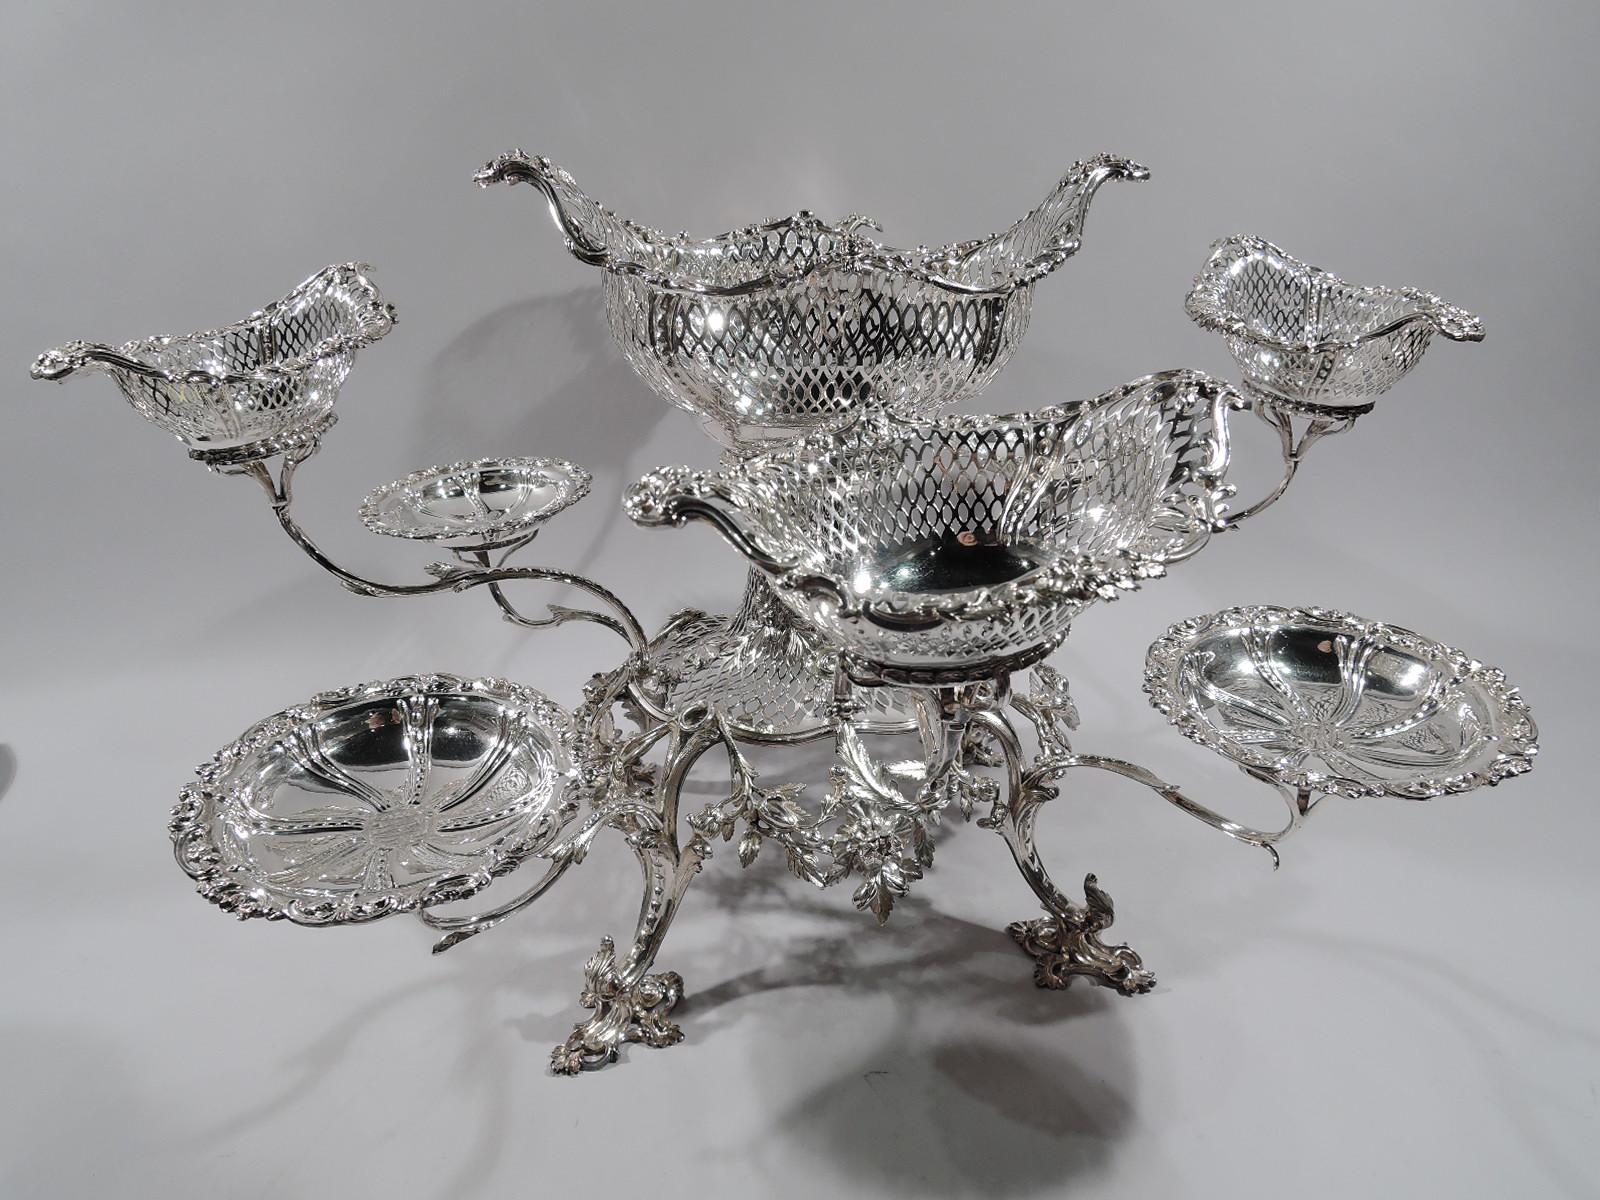 Market-fresh George III sterling silver epergne. Made by Thomas Pitts in London in 1766. Pierced and oval support set in round floral garland frame with four leafing scroll supports on same feet. Large and pierced oval basket, surrounded by